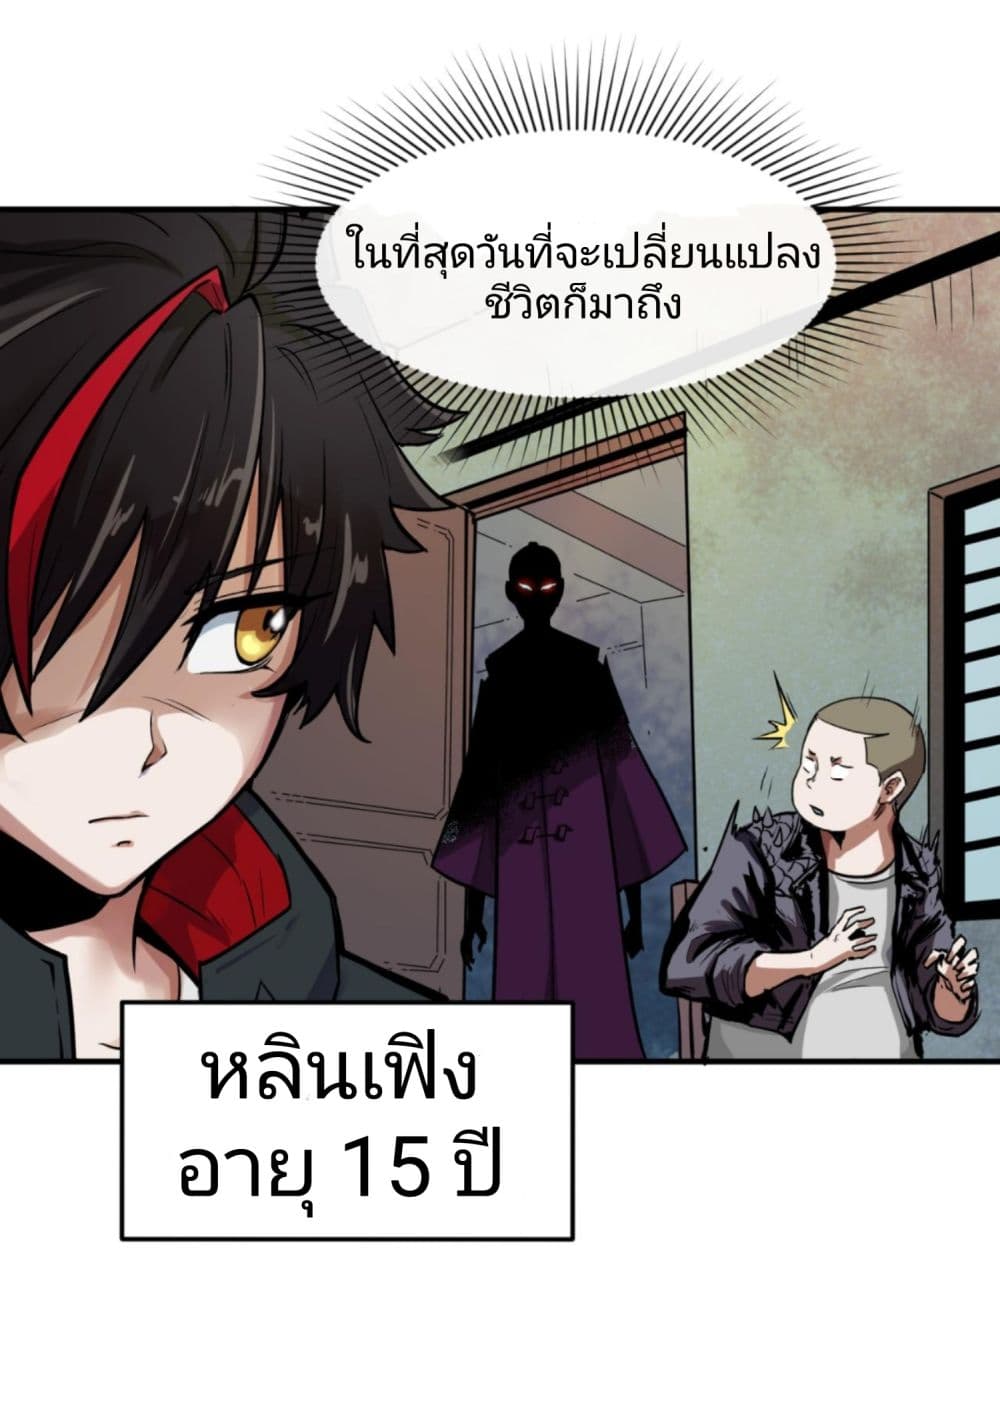 The Age of Ghost Spirits à¸à¸­à¸à¸à¸µà¹ 1 (11)